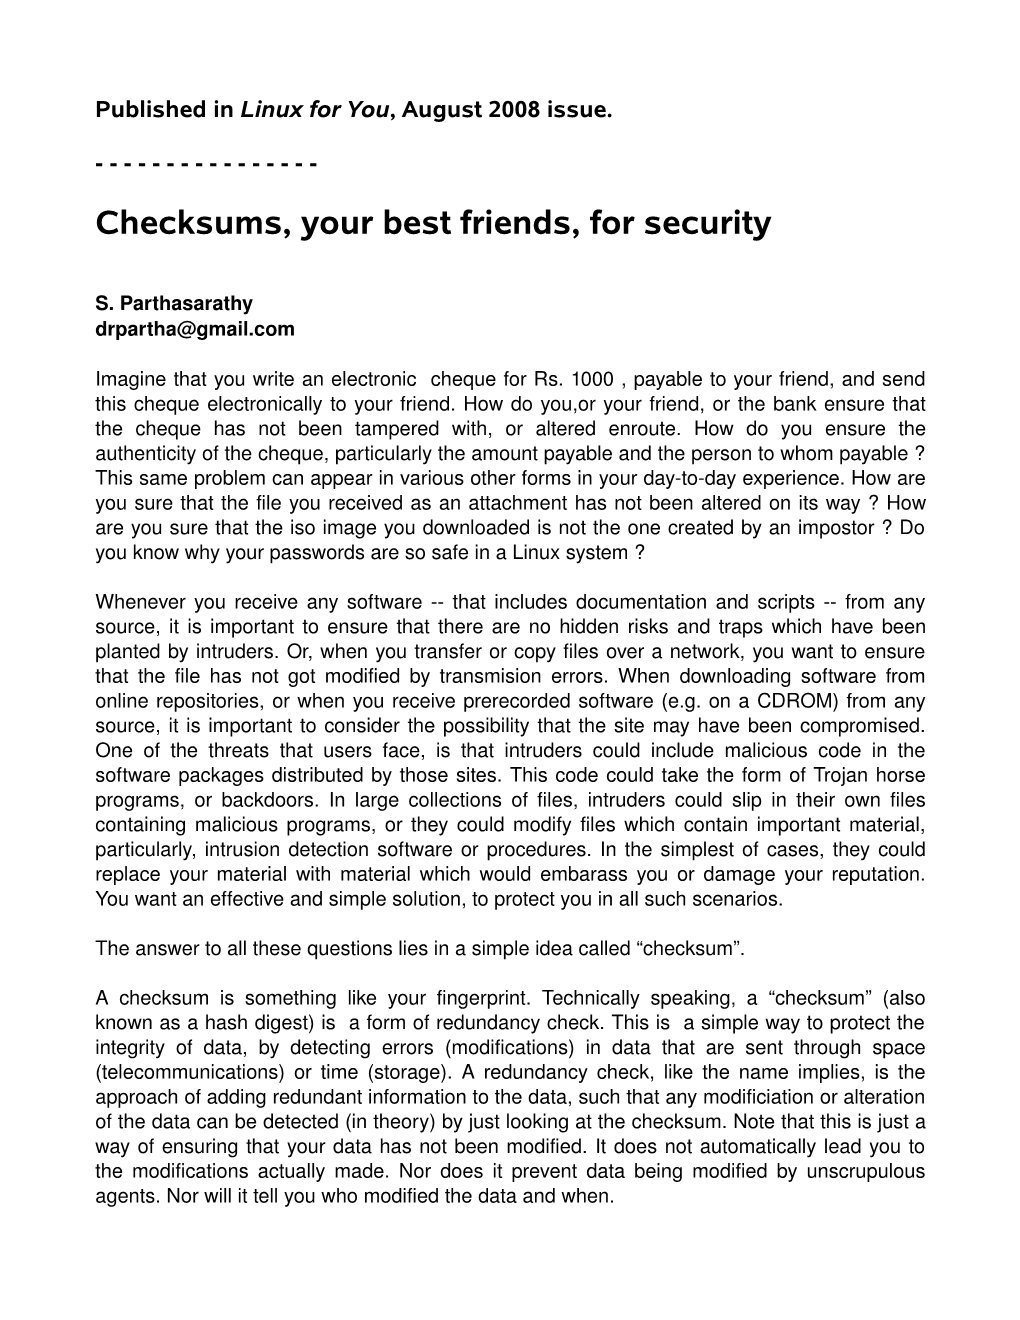 Checksums, Your Best Friends, for Security